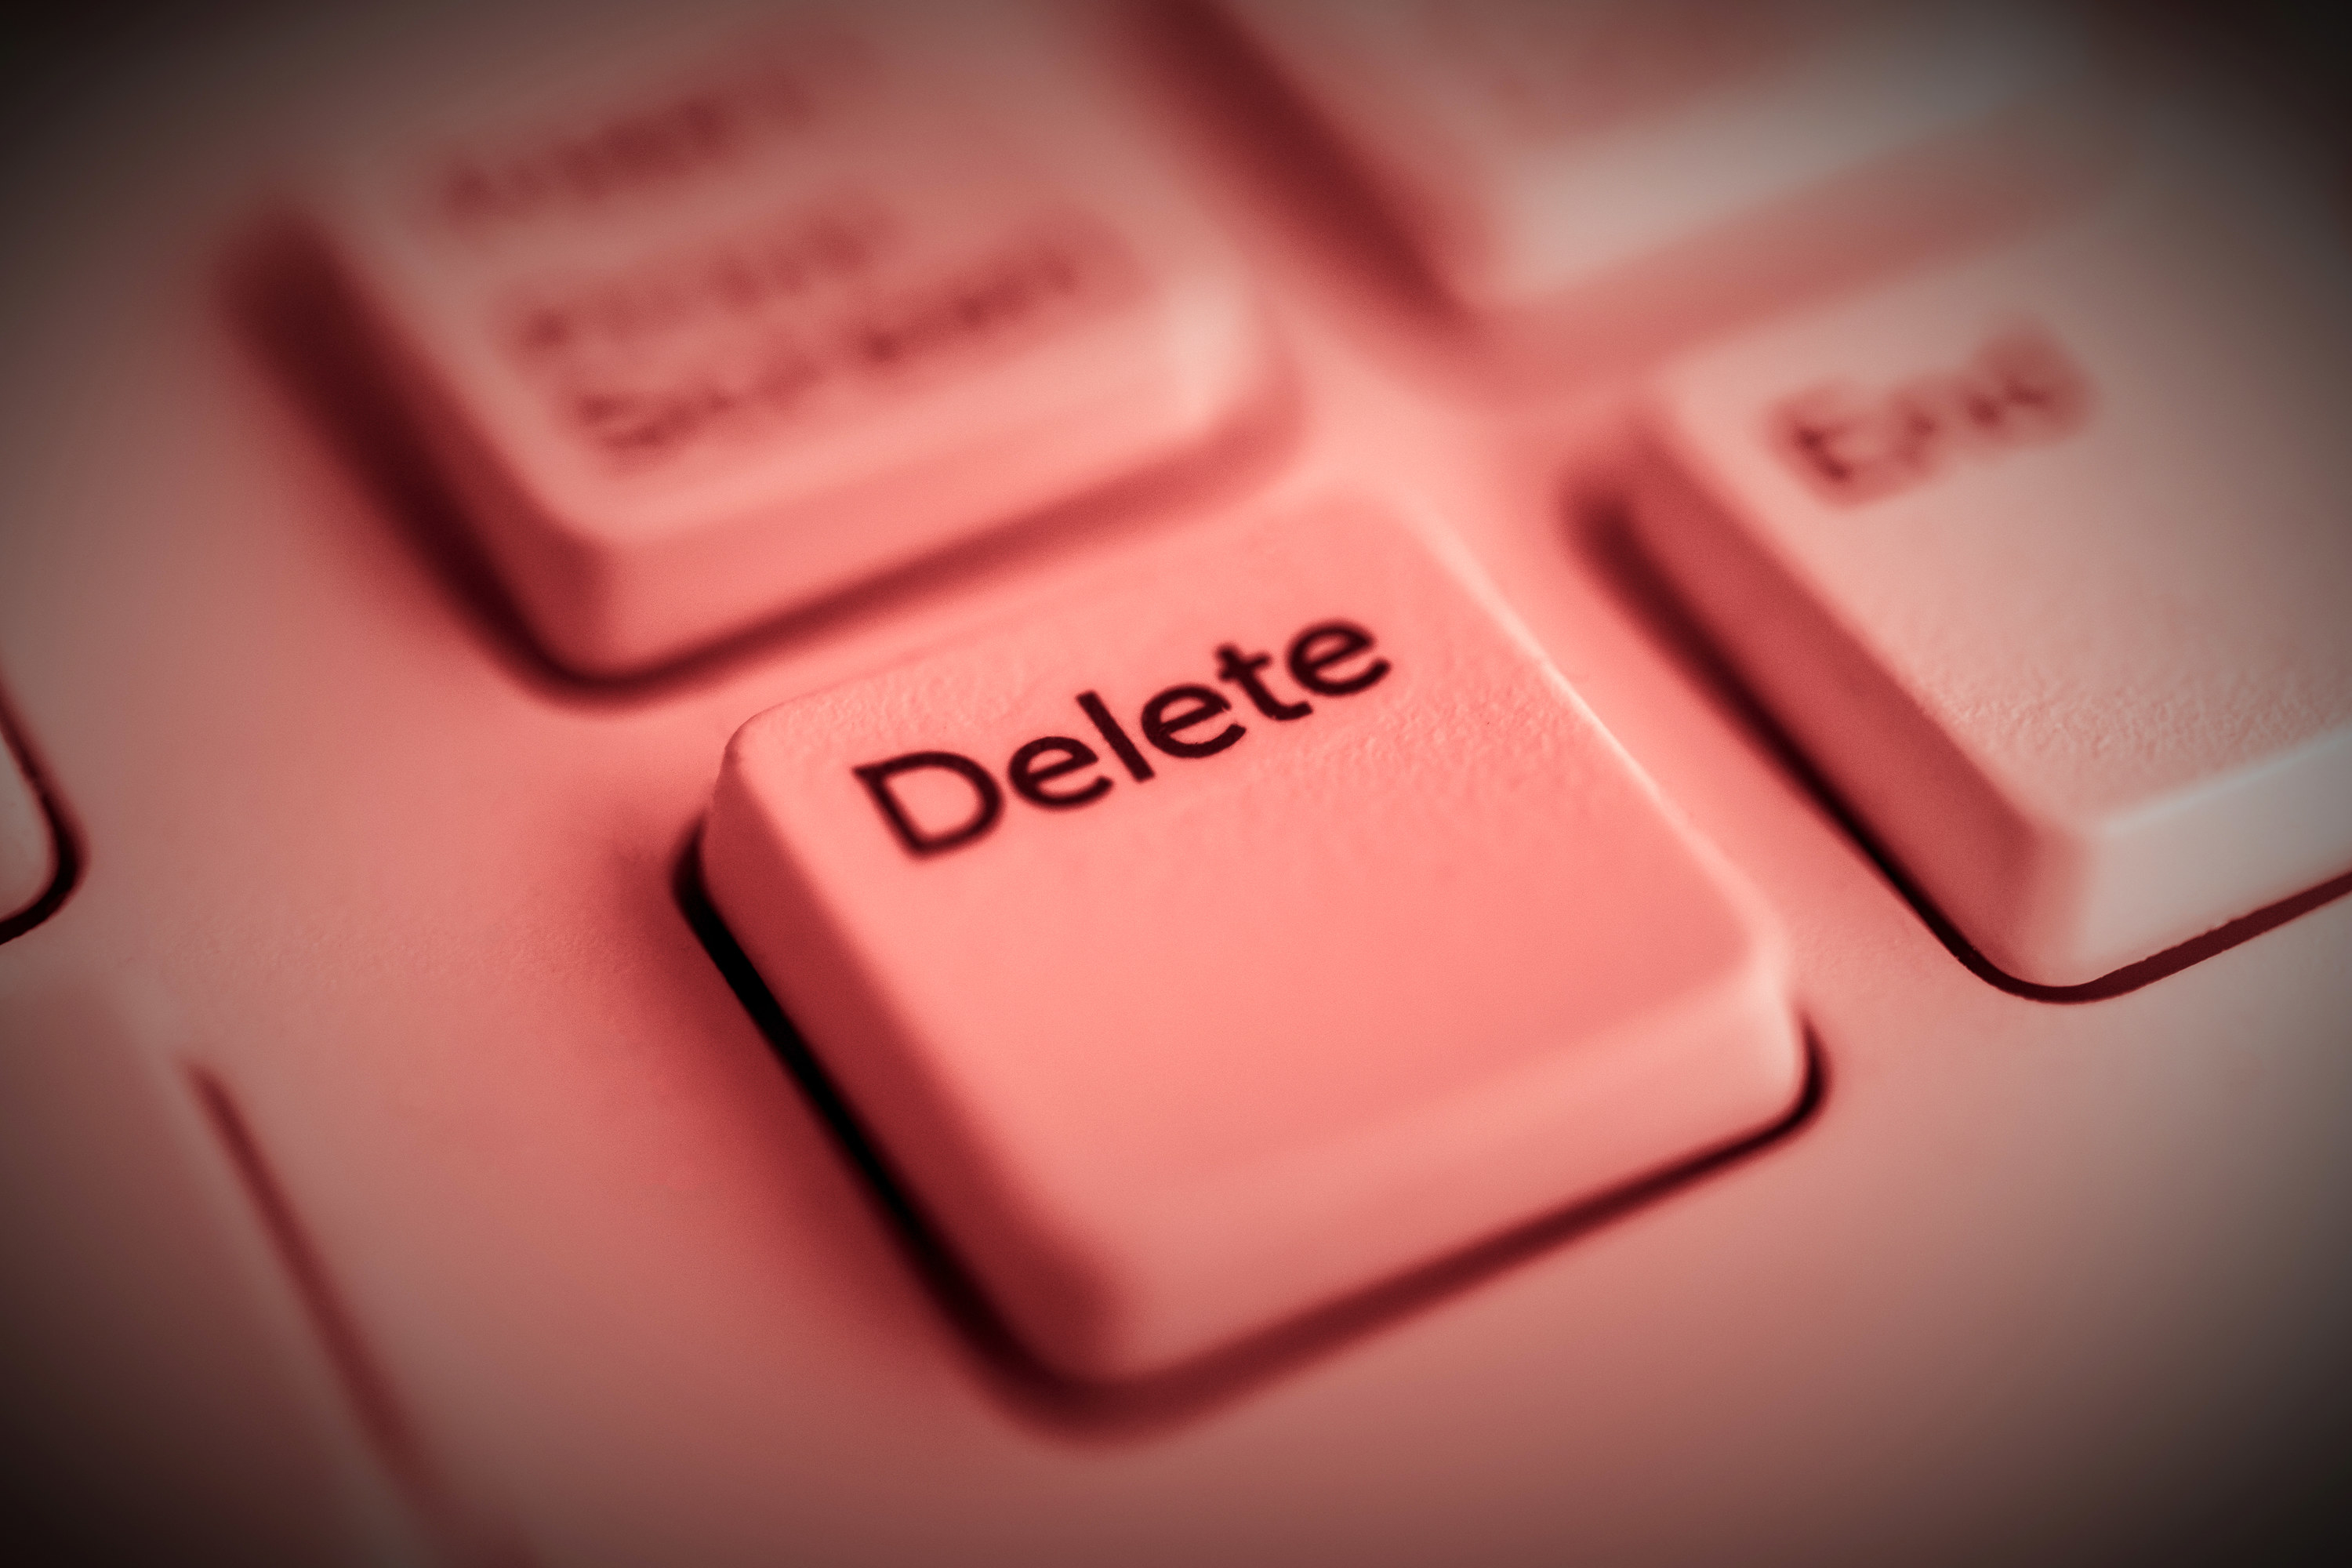 delete button on a computer keyboard